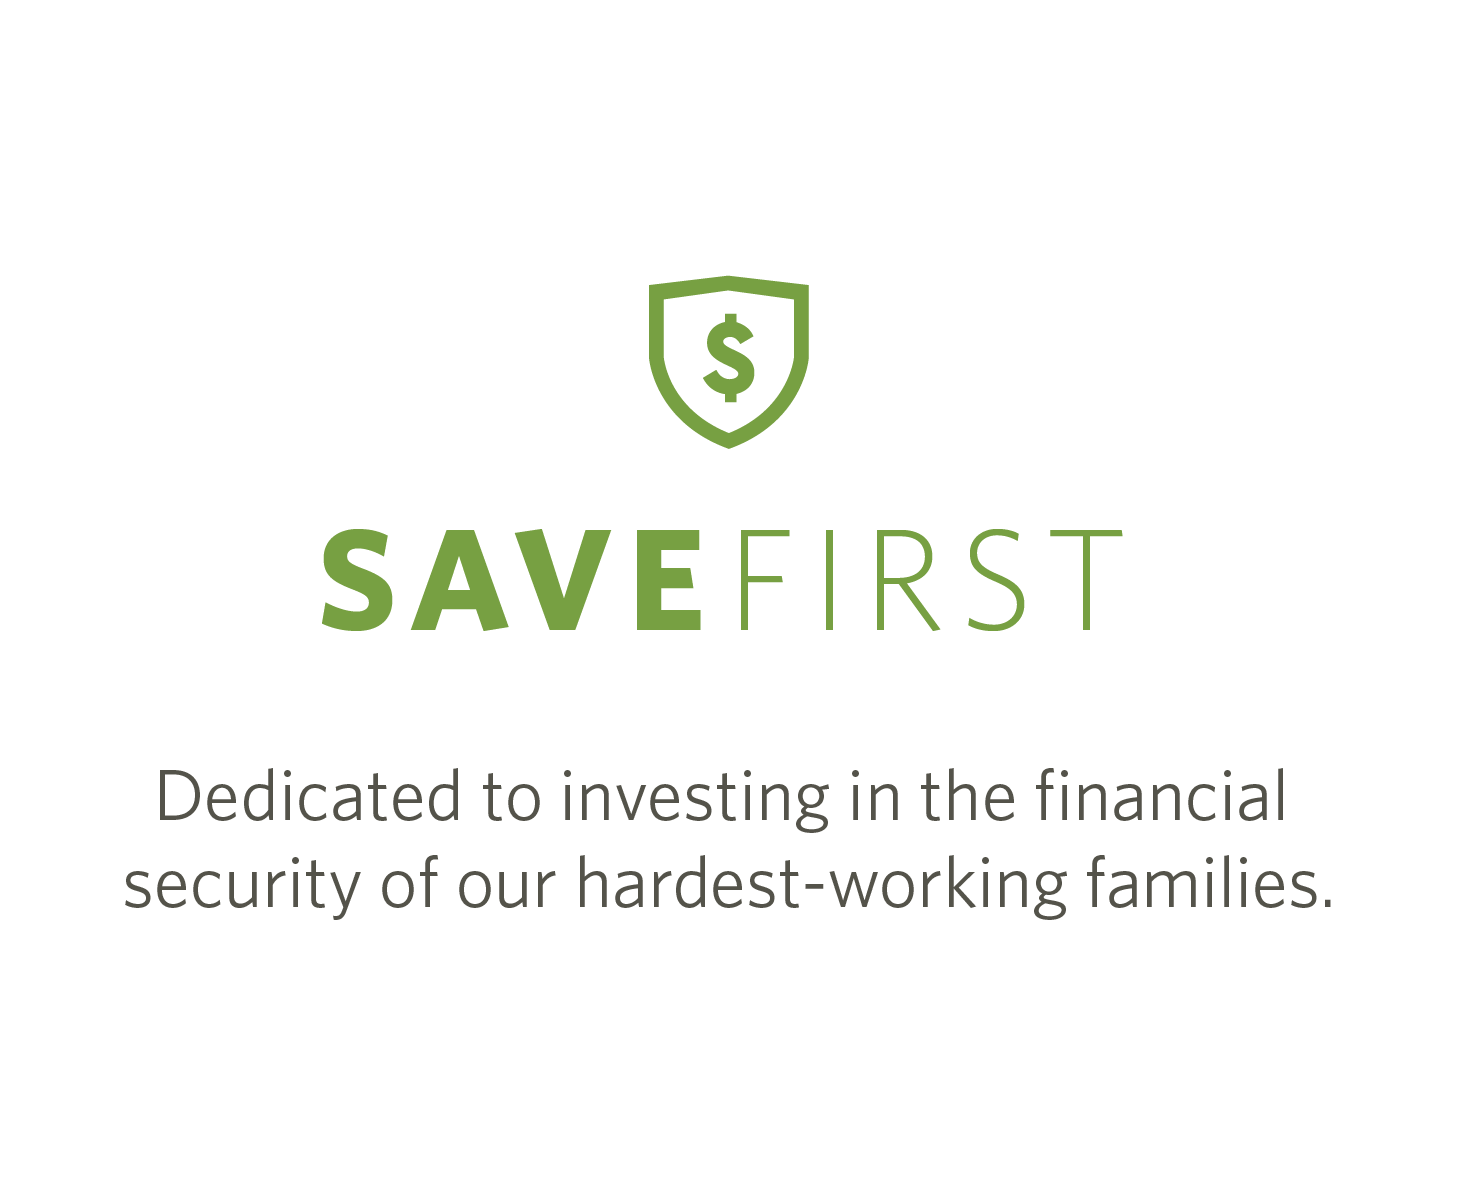 SaveFirst - Dedicated to investing in the financial security of our hardest-working families